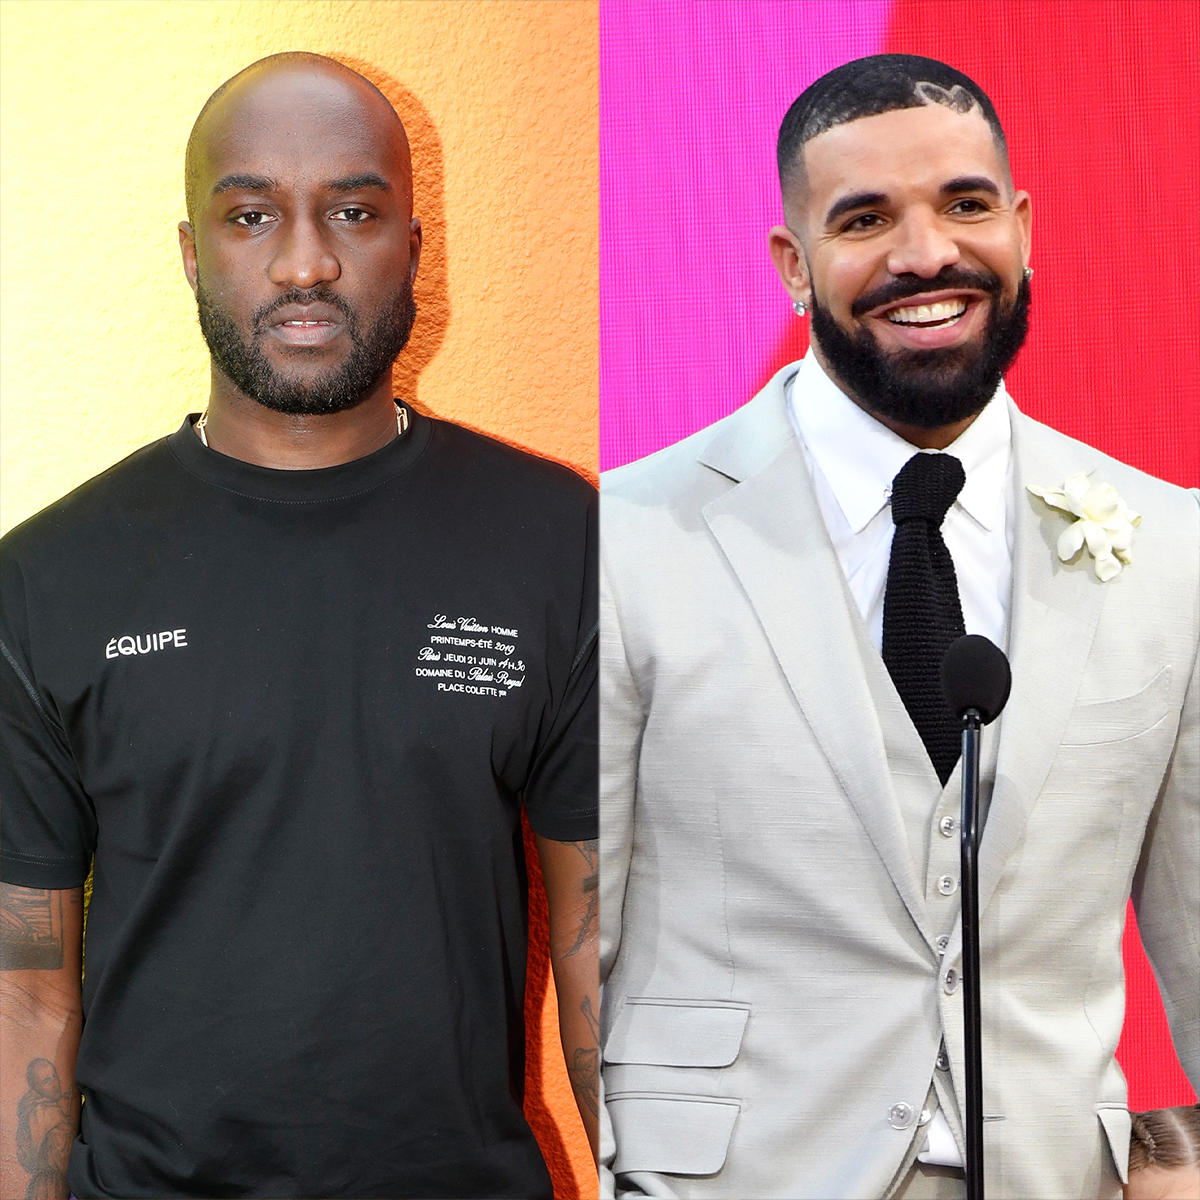 Virgil Abloh Dead at 41: Drake, Hailey Bieber and More Pay Tribute